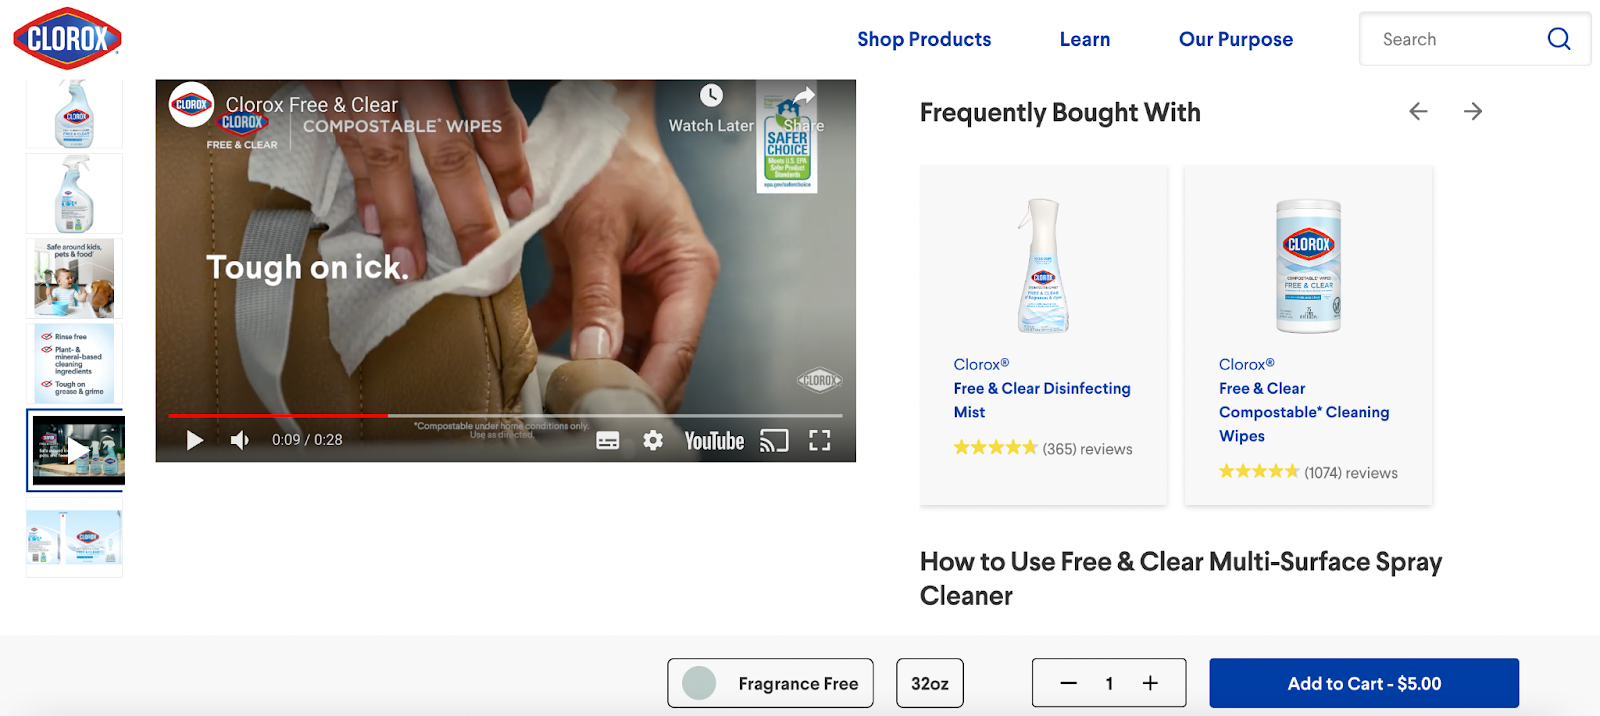 clorox product images example with video